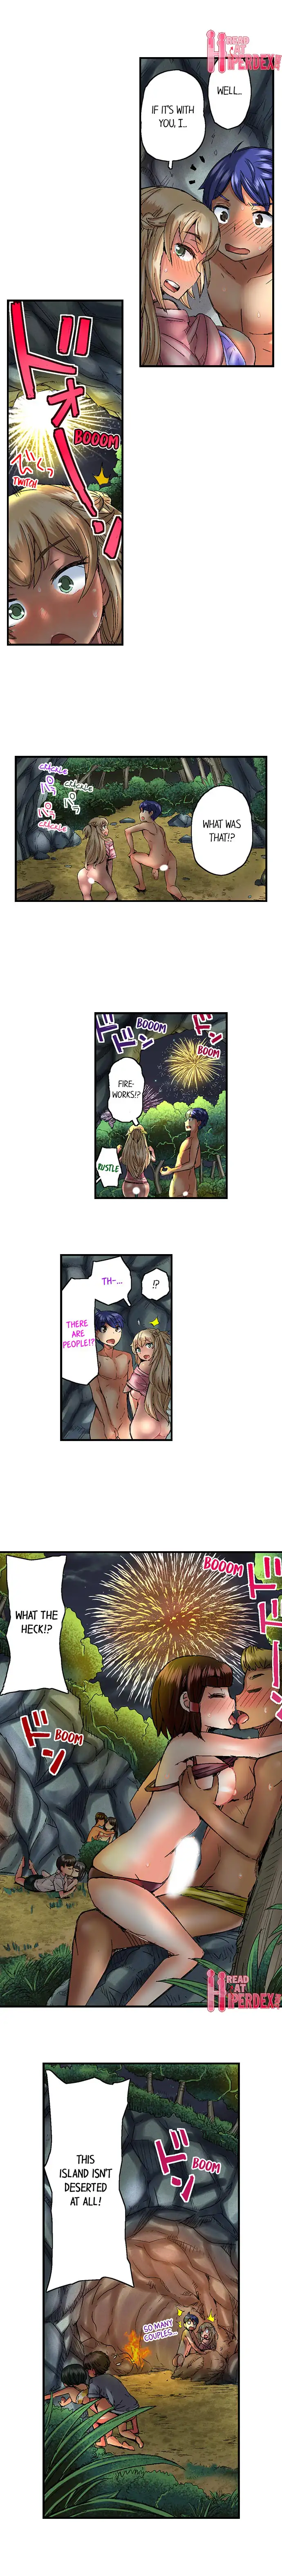 Taking a Hot Tanned Chick’s Virginity - Chapter 11 Page 9